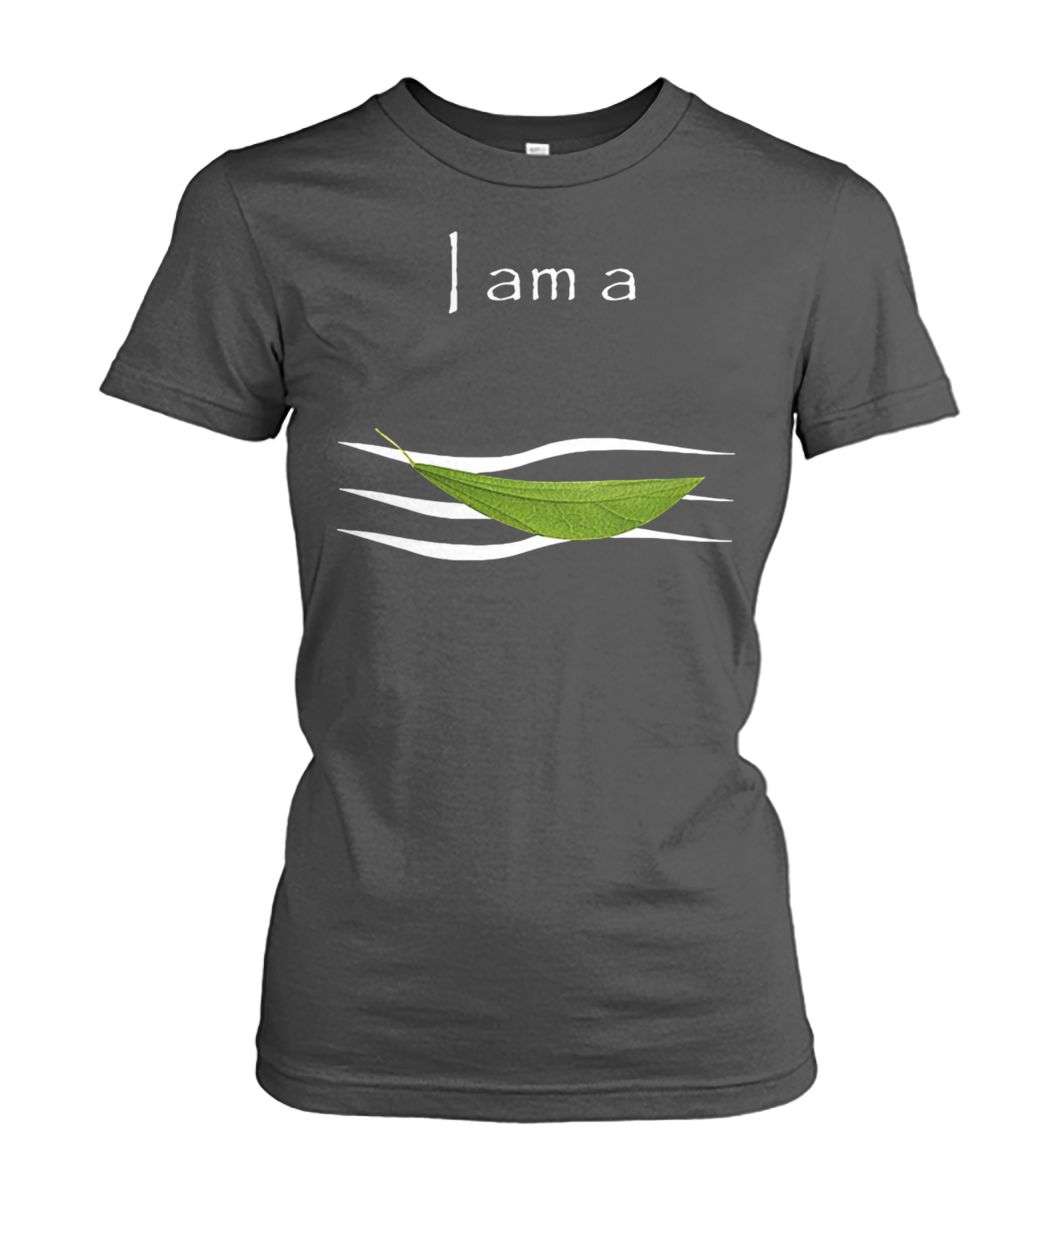 I am a leaf on the wind women's crew tee